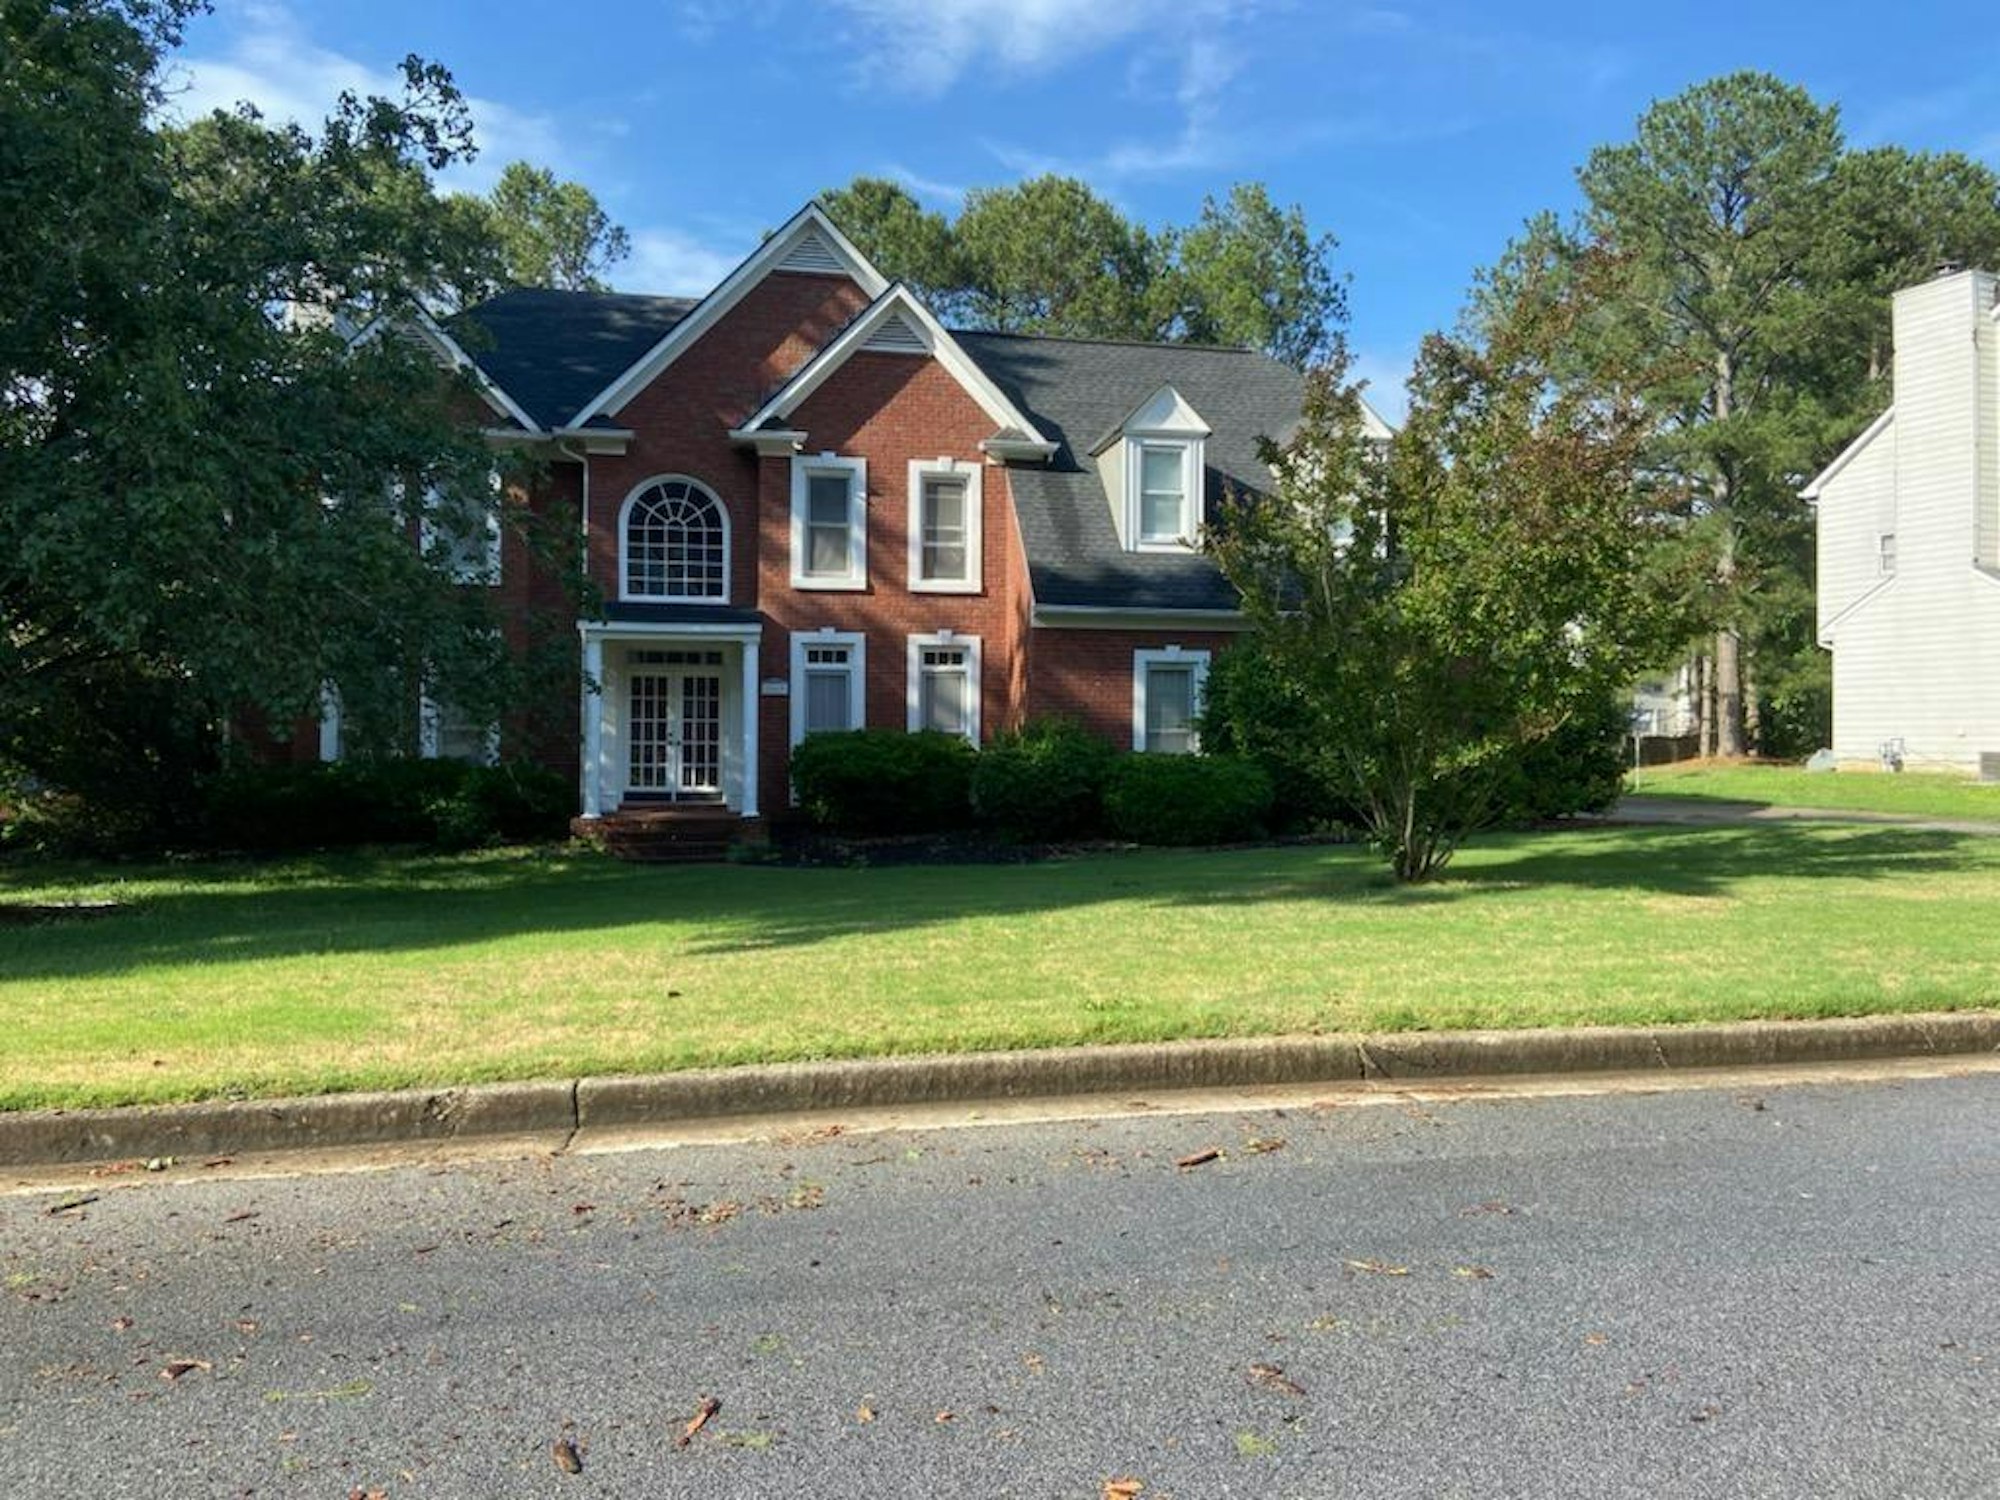 Photo 1 of 6 - 1669 Brentwood Xing SE, Conyers, GA 30013